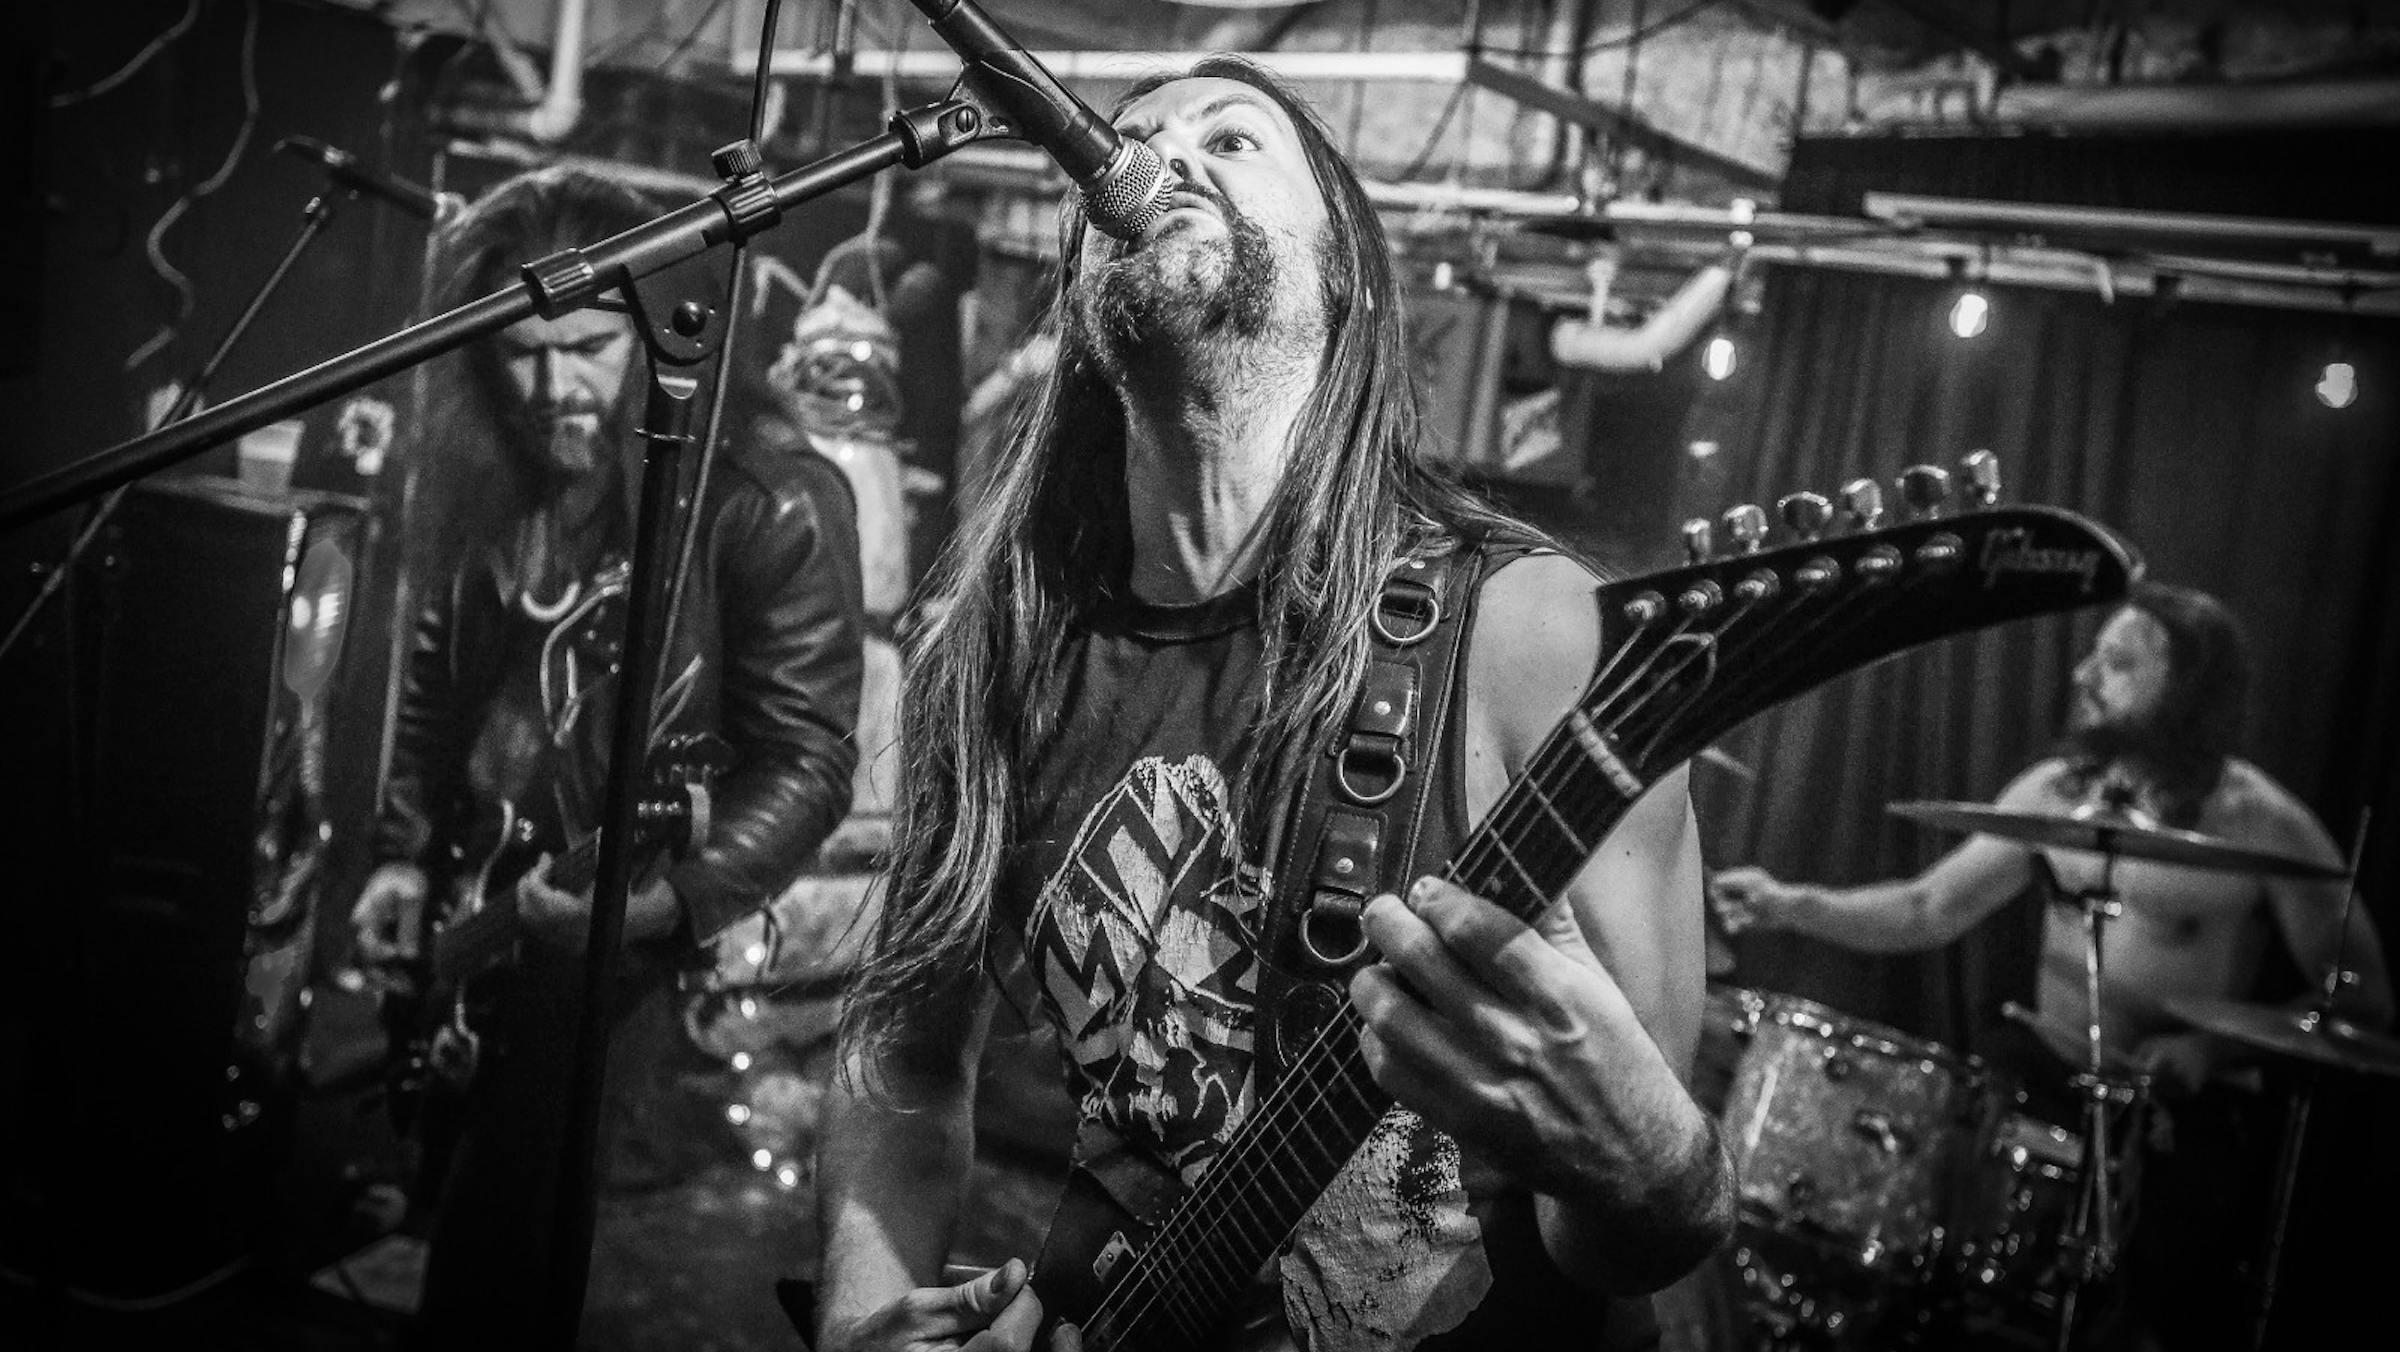 A Seizure Almost Devastated His Ability to Play Death Metal